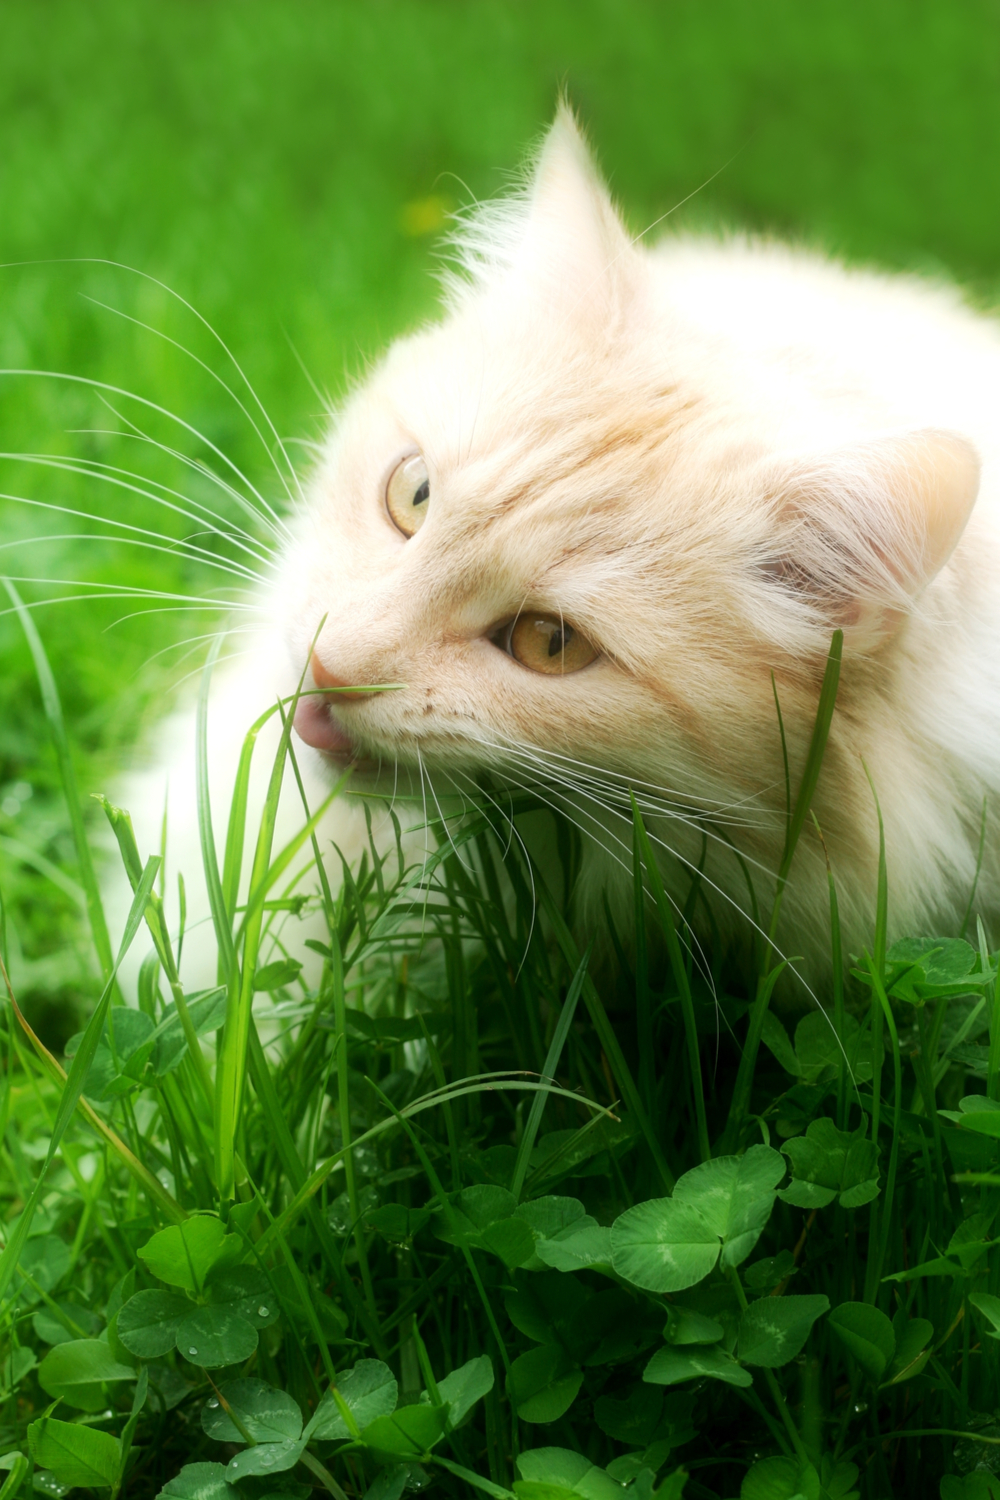 What should you do if your cat eats grass